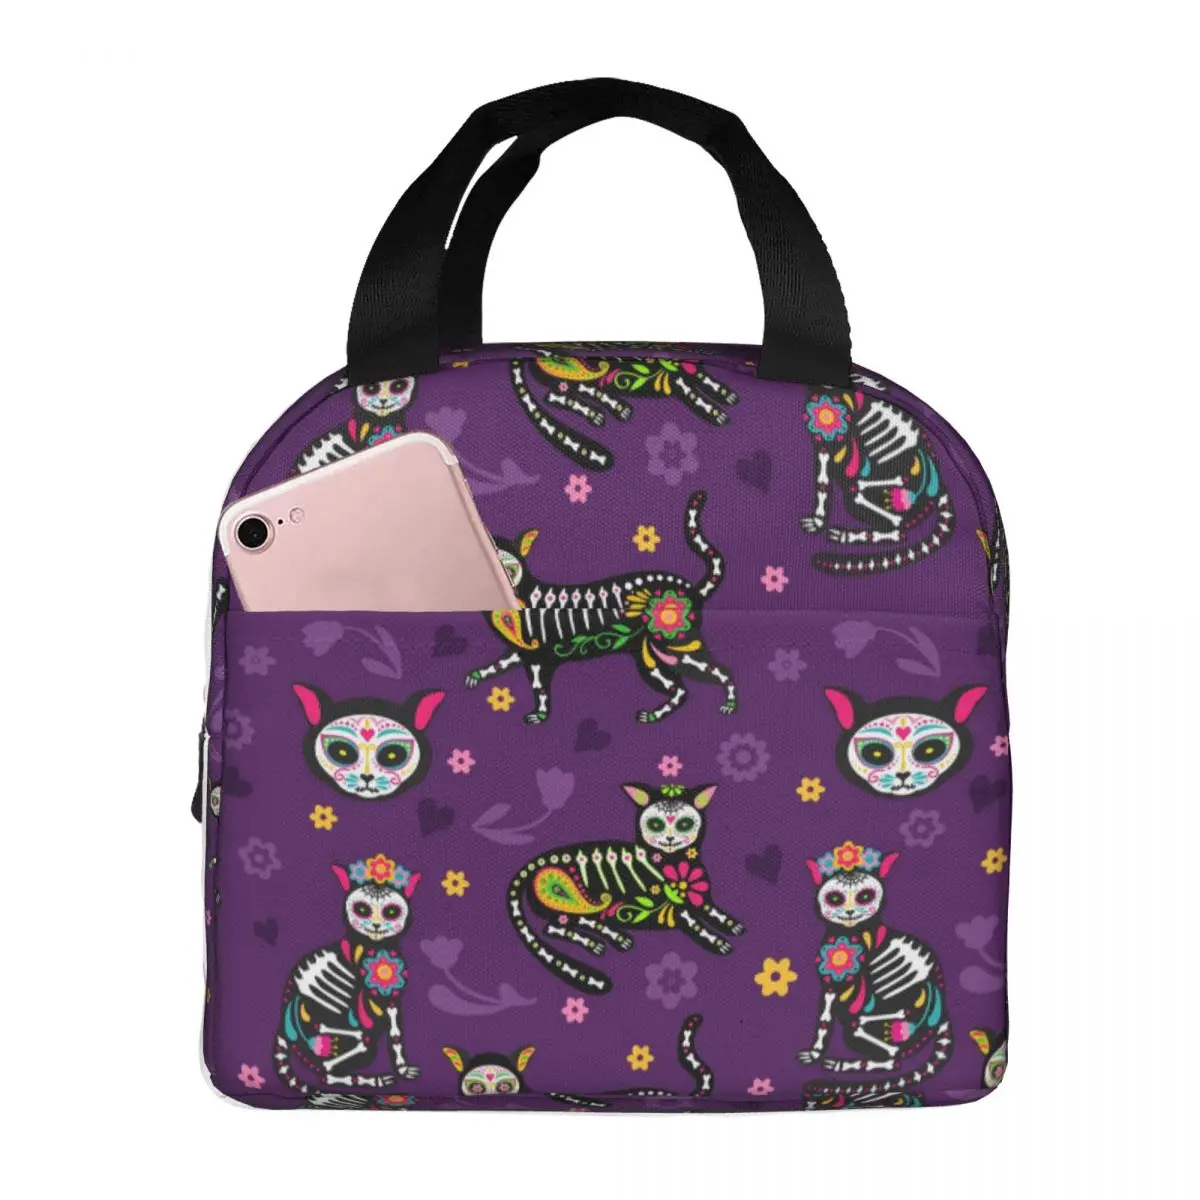 

Sugar Skull Calavera Cats Mexican Style Lunch Bag Portable Insulated Thermal Cooler Bento Box Tote Picnic Storage Bag Pouch